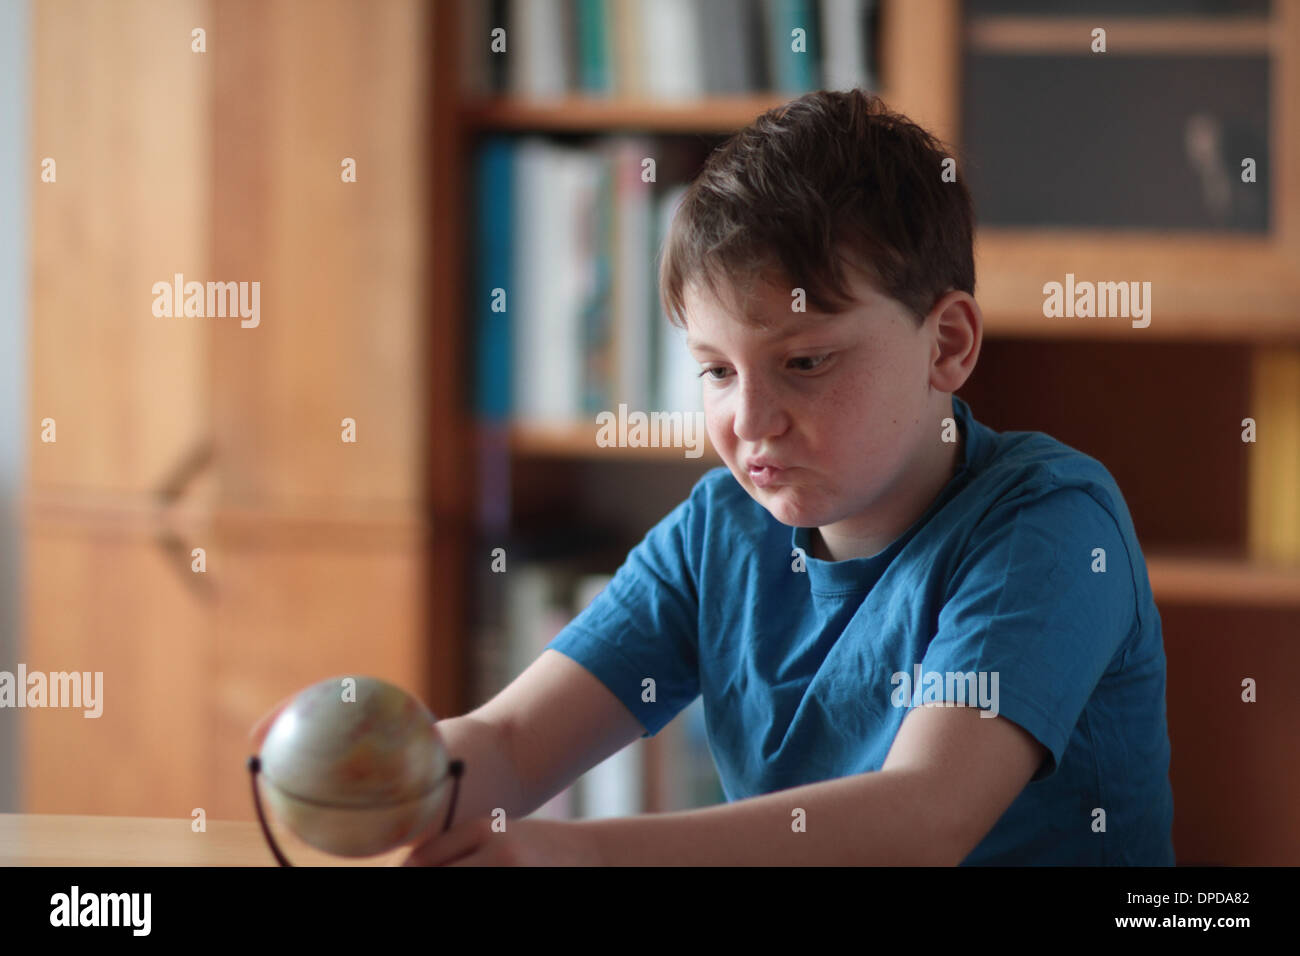 boy searching something on a world ball Stock Photo